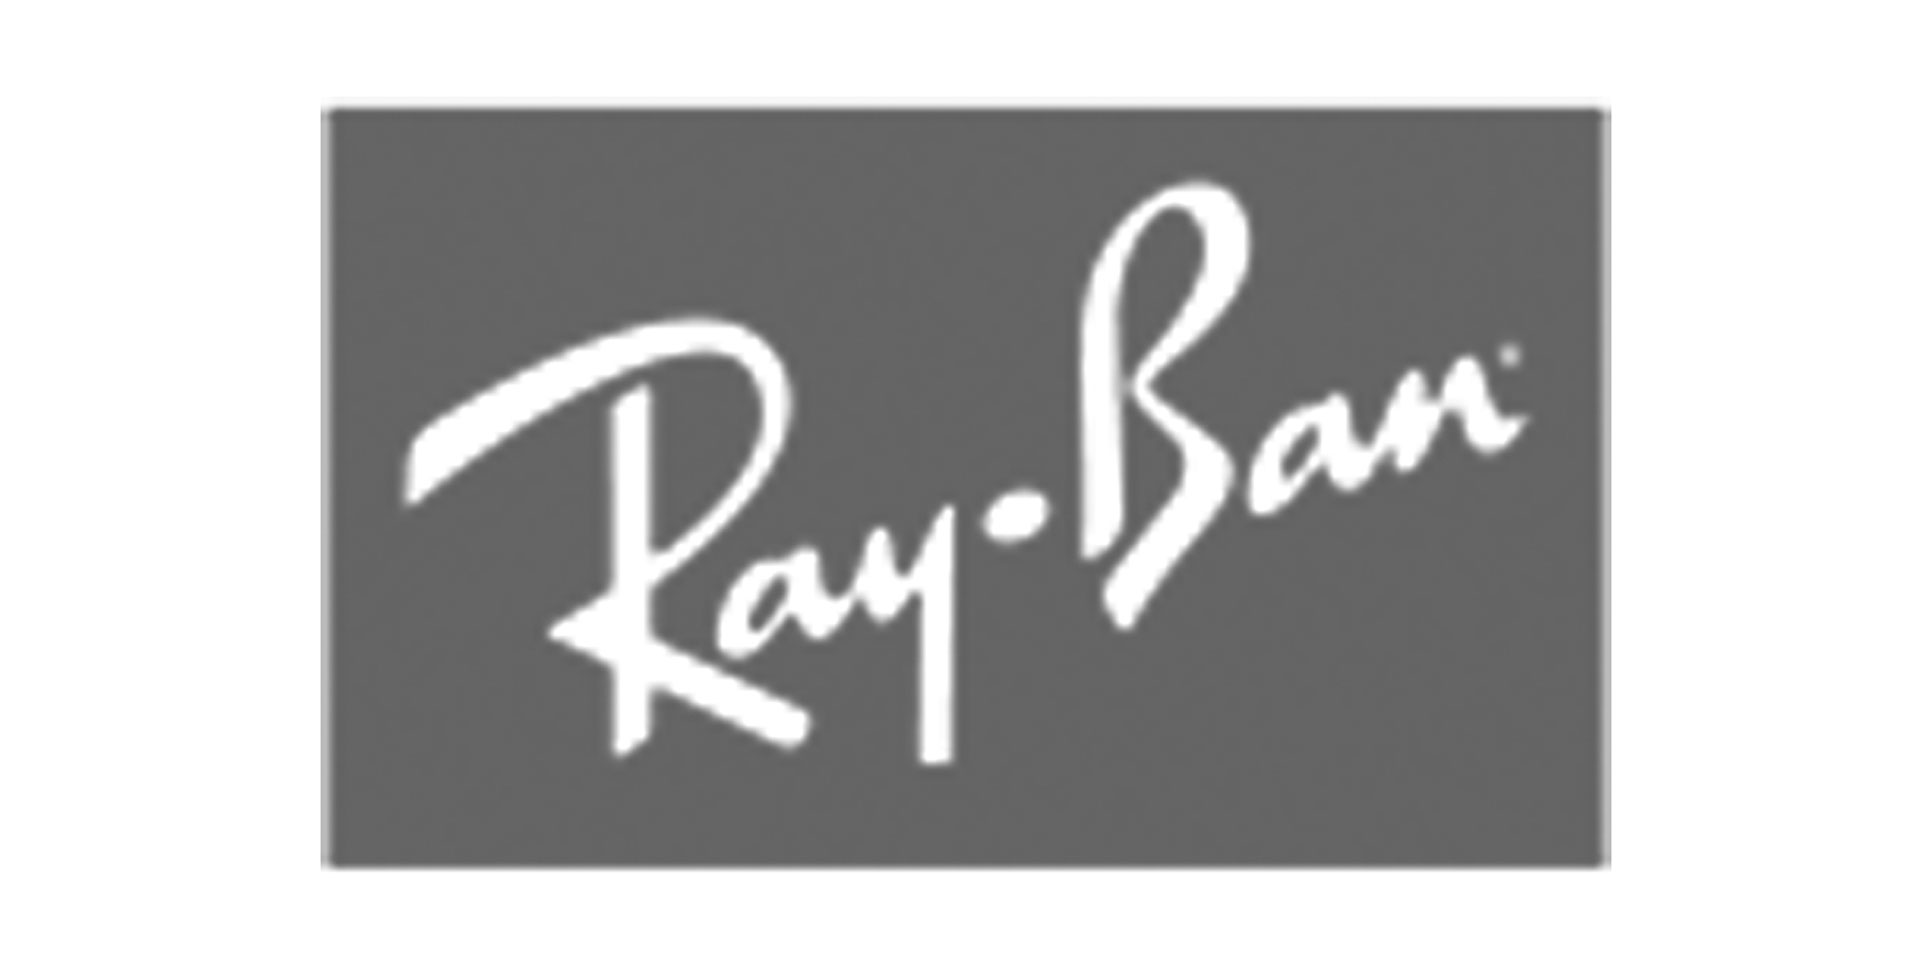 Corrective and replacement lenses for Ray-Ban RB4068 sunglasses